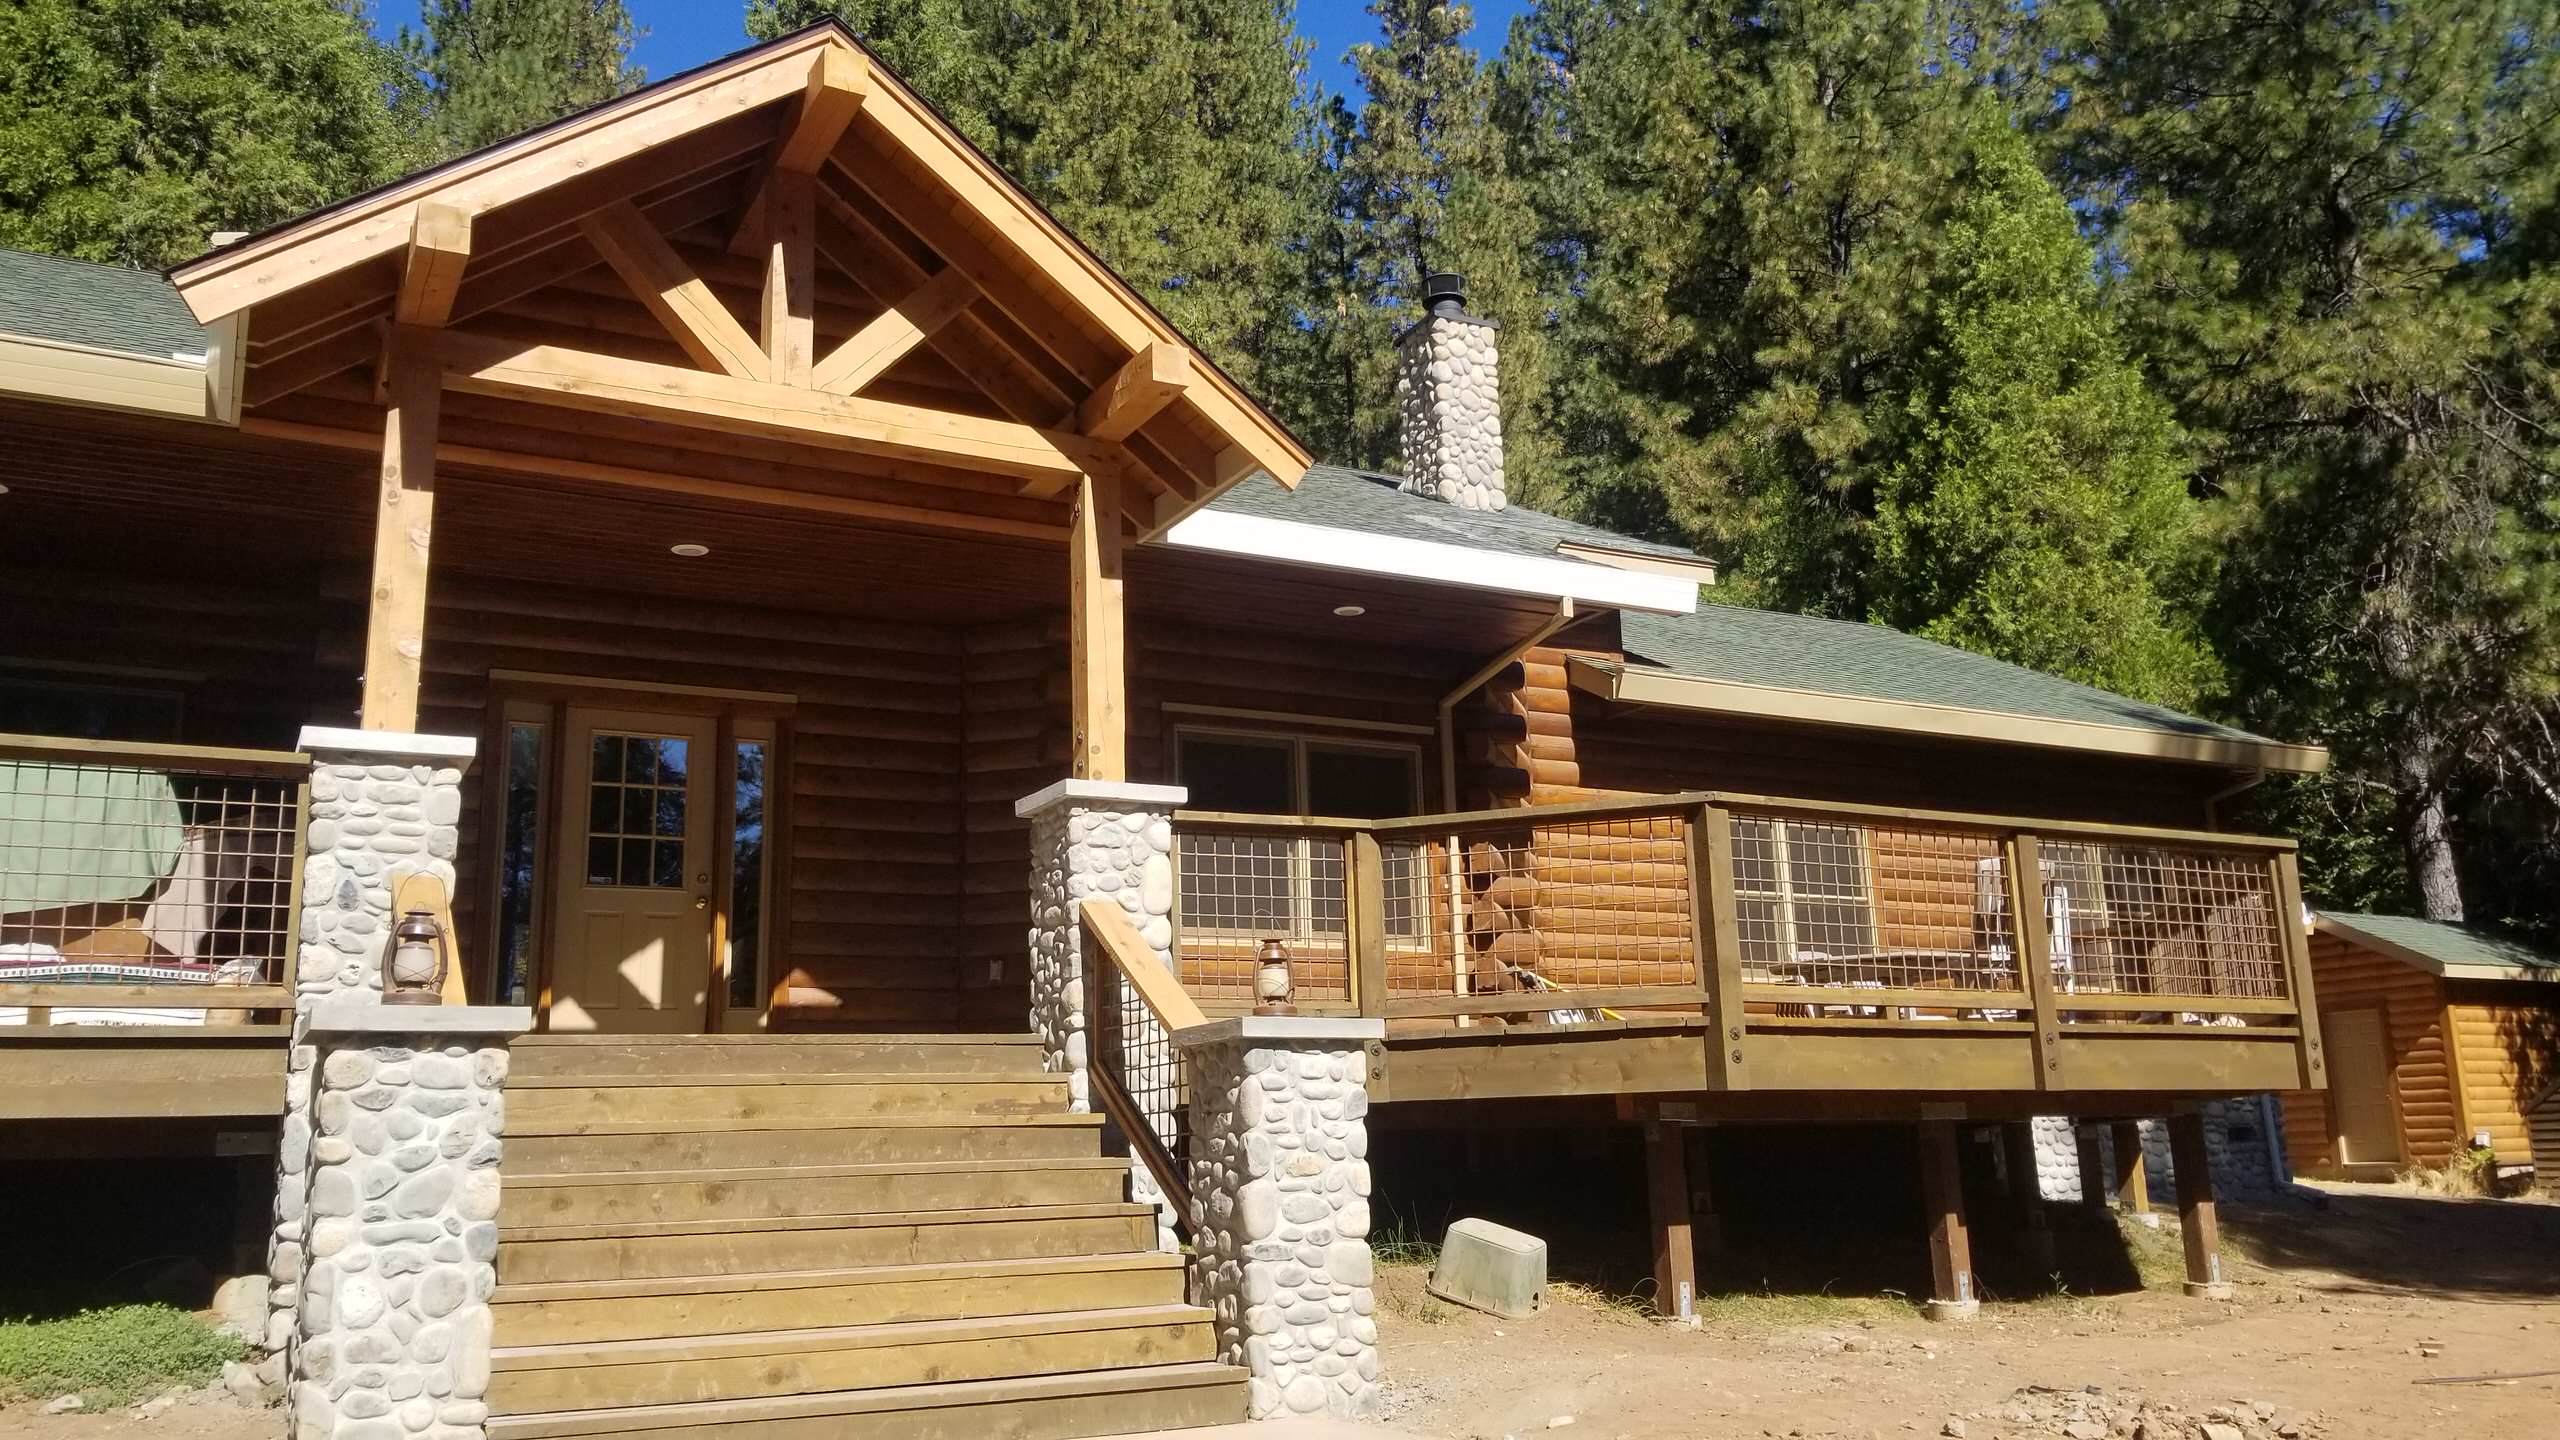 Complete remodel of log mountain home near Scotts Flat  Nevada City ,CA